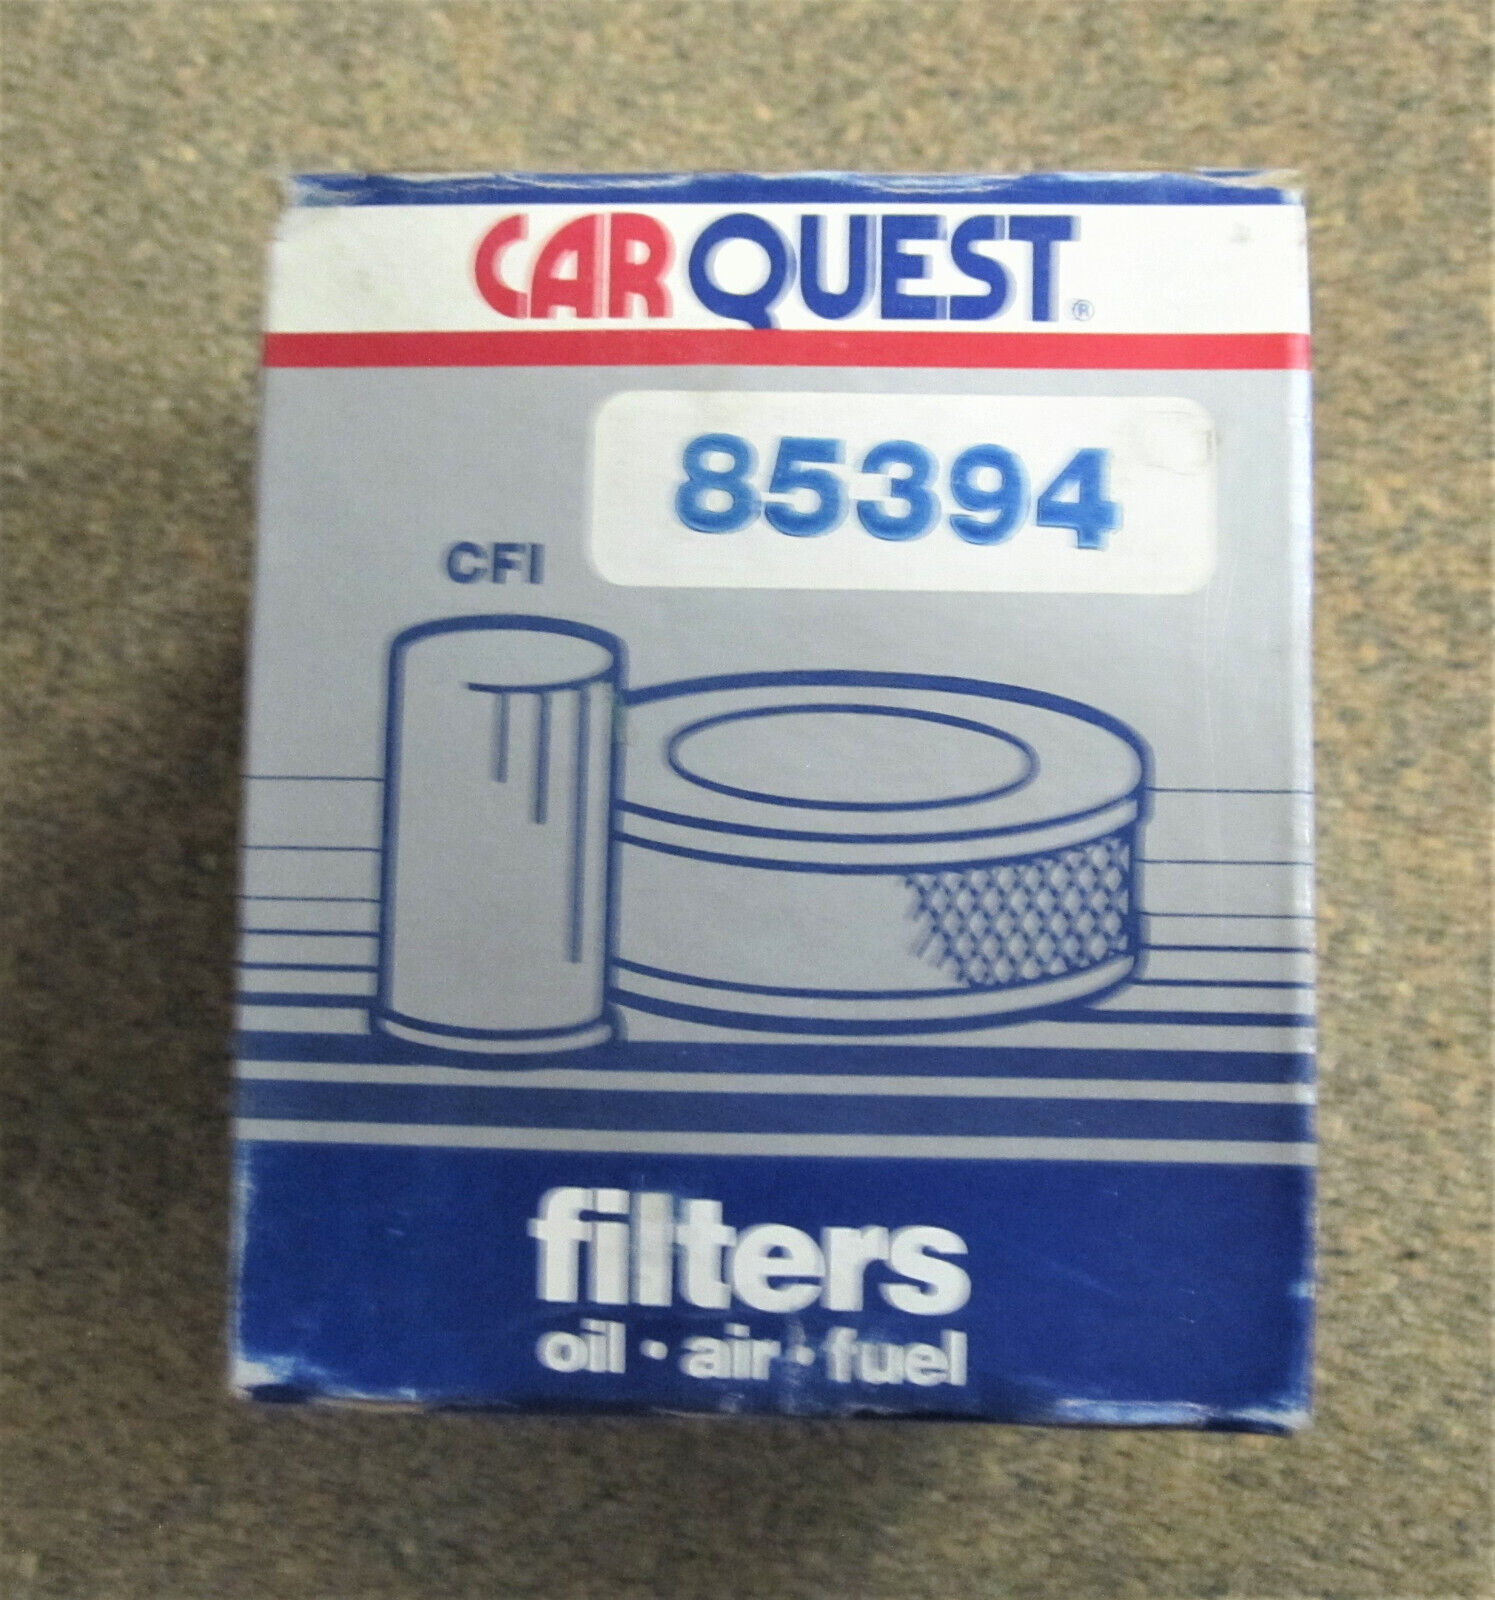 Oil Filter, Car Quest, 85394, 4 Pack, New